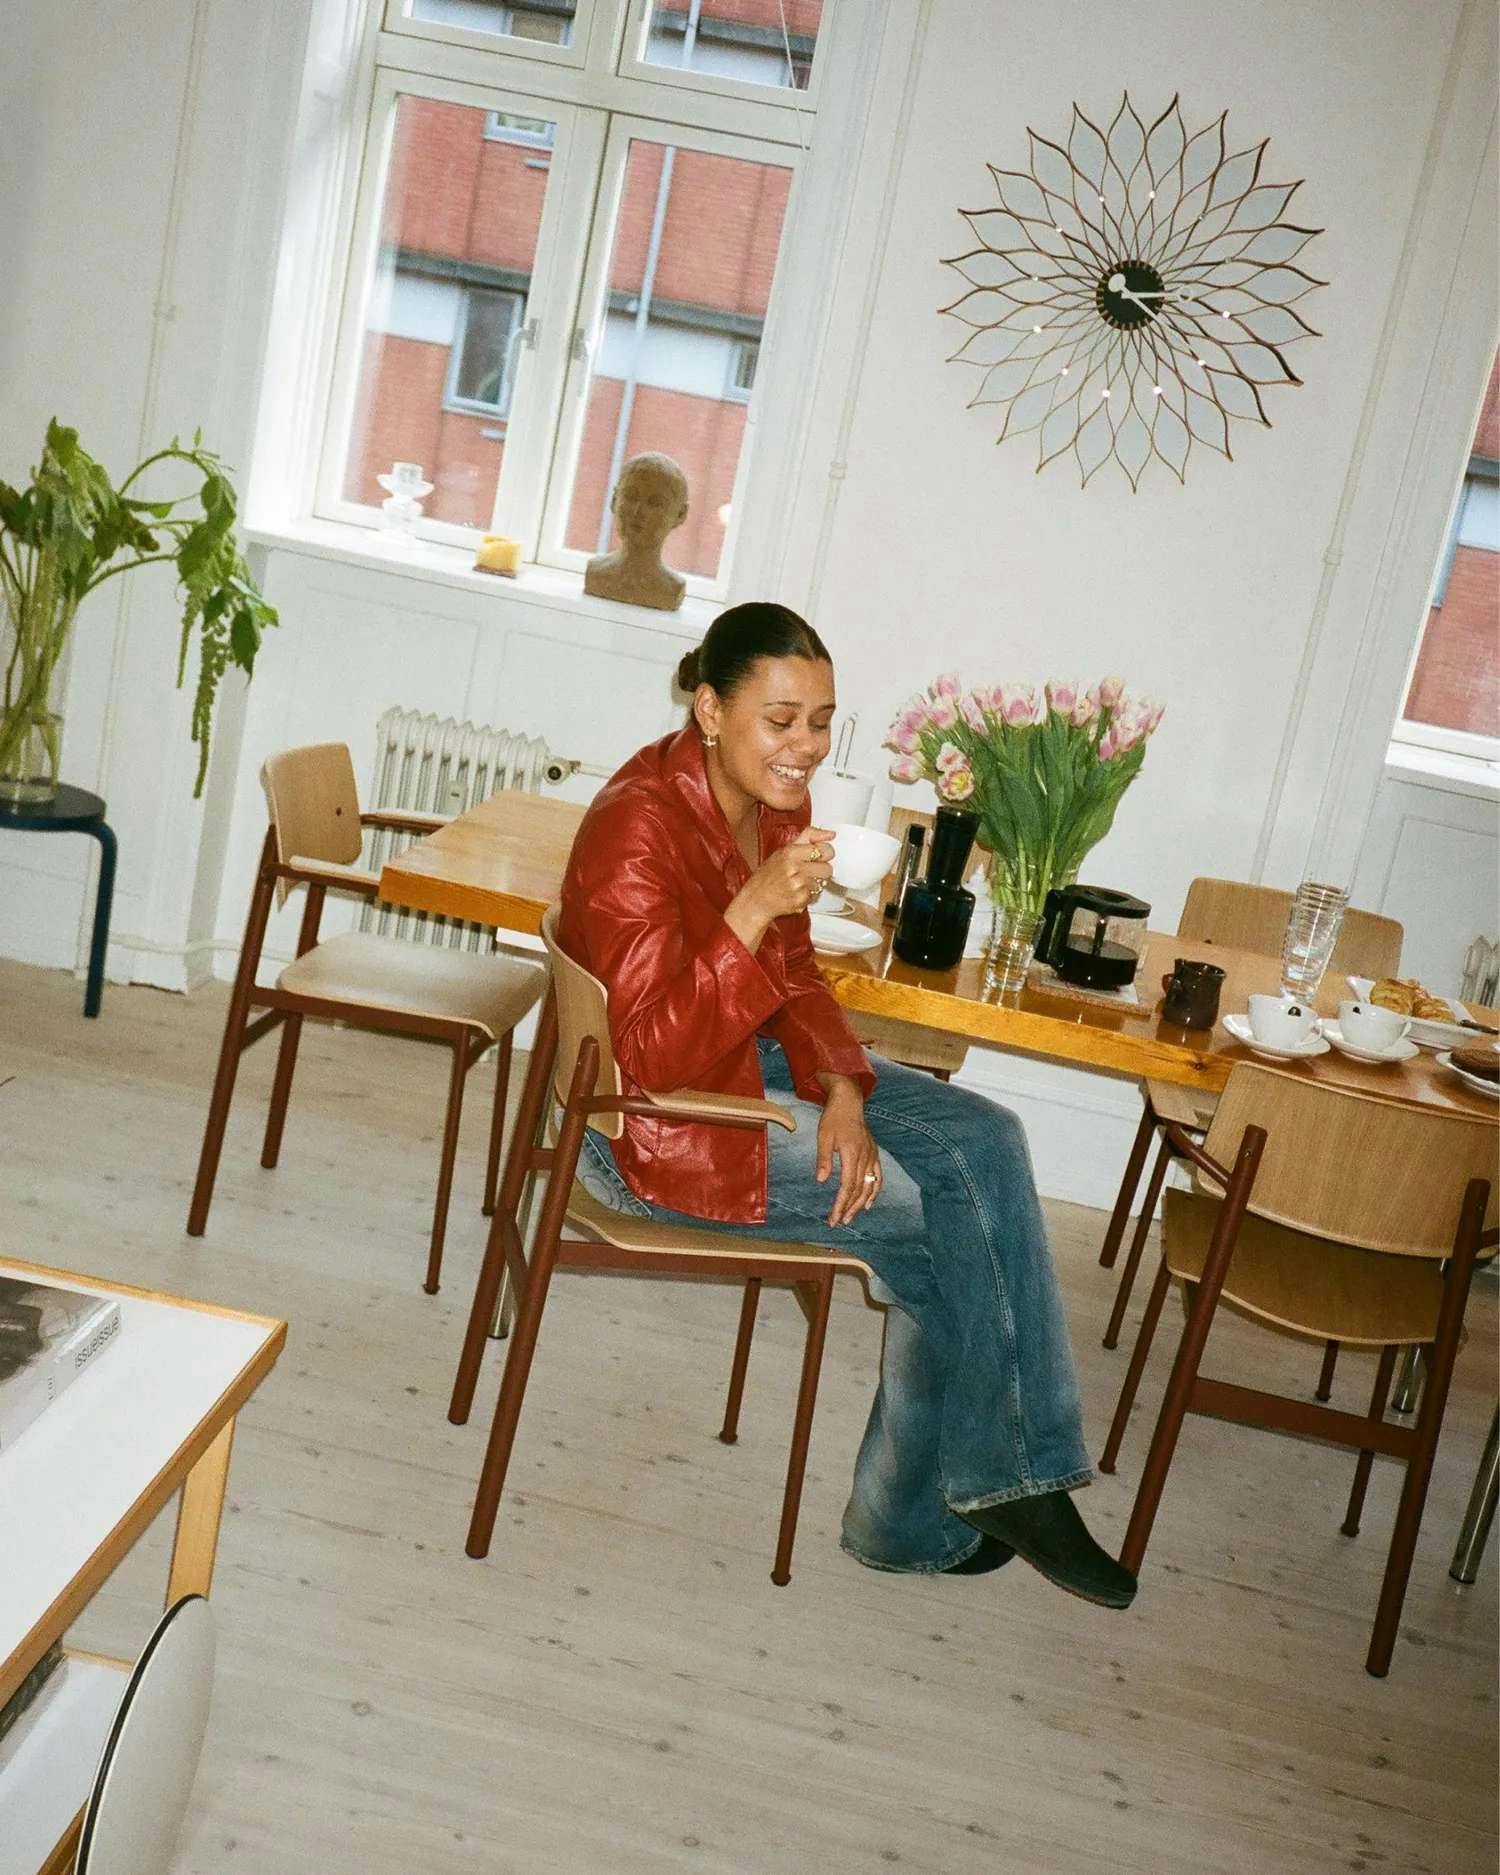 A homeowner drinking coffee in her apartment.